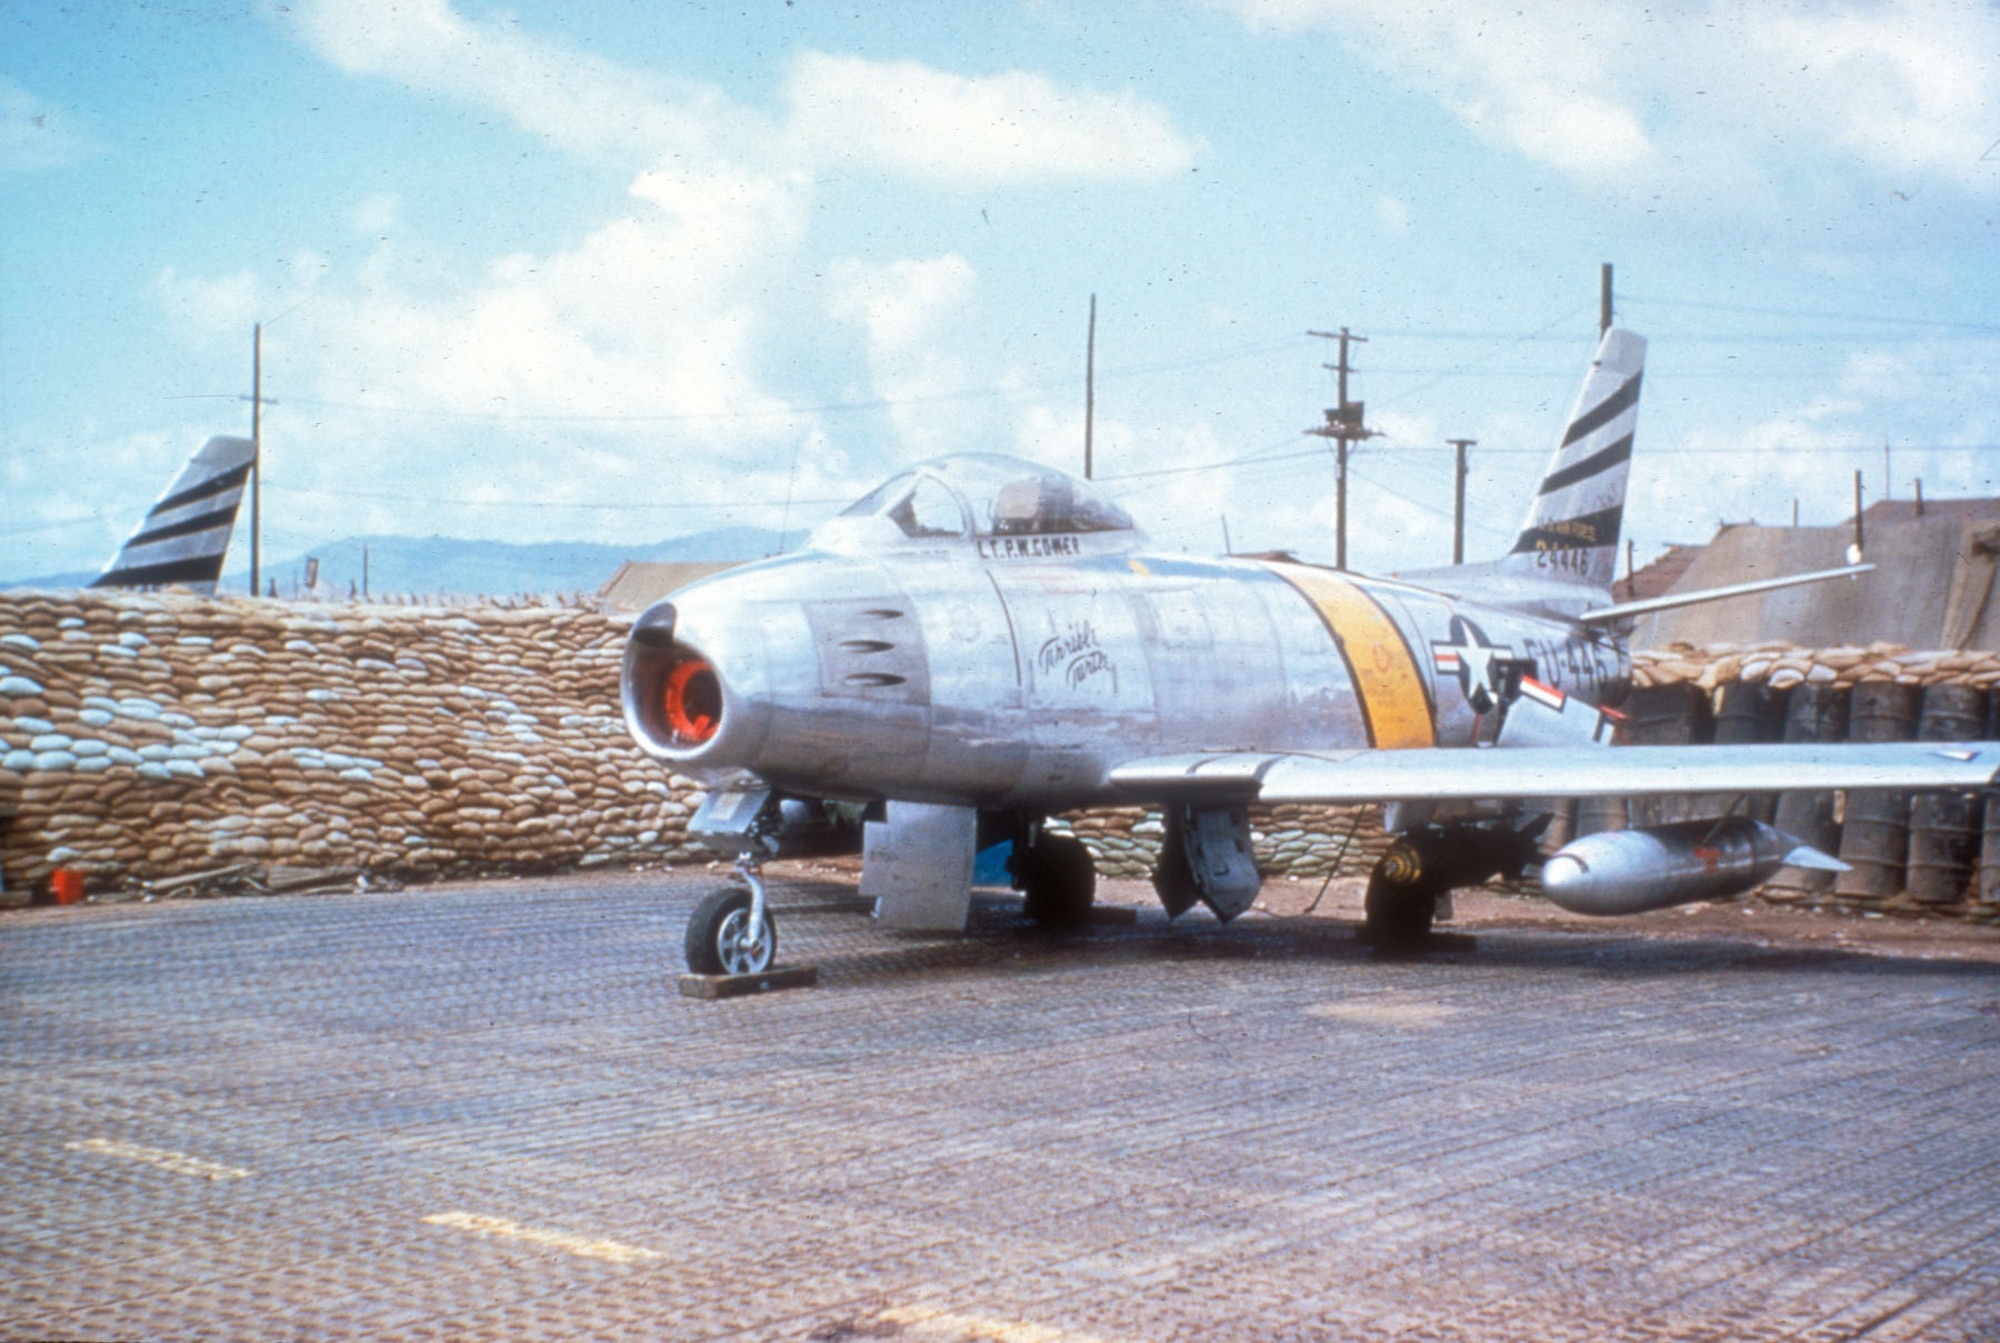 F-86F sitting on PSP (Pierced Steel Planking). PSP was used to create temporary runways. (U.S. Air Force photo)